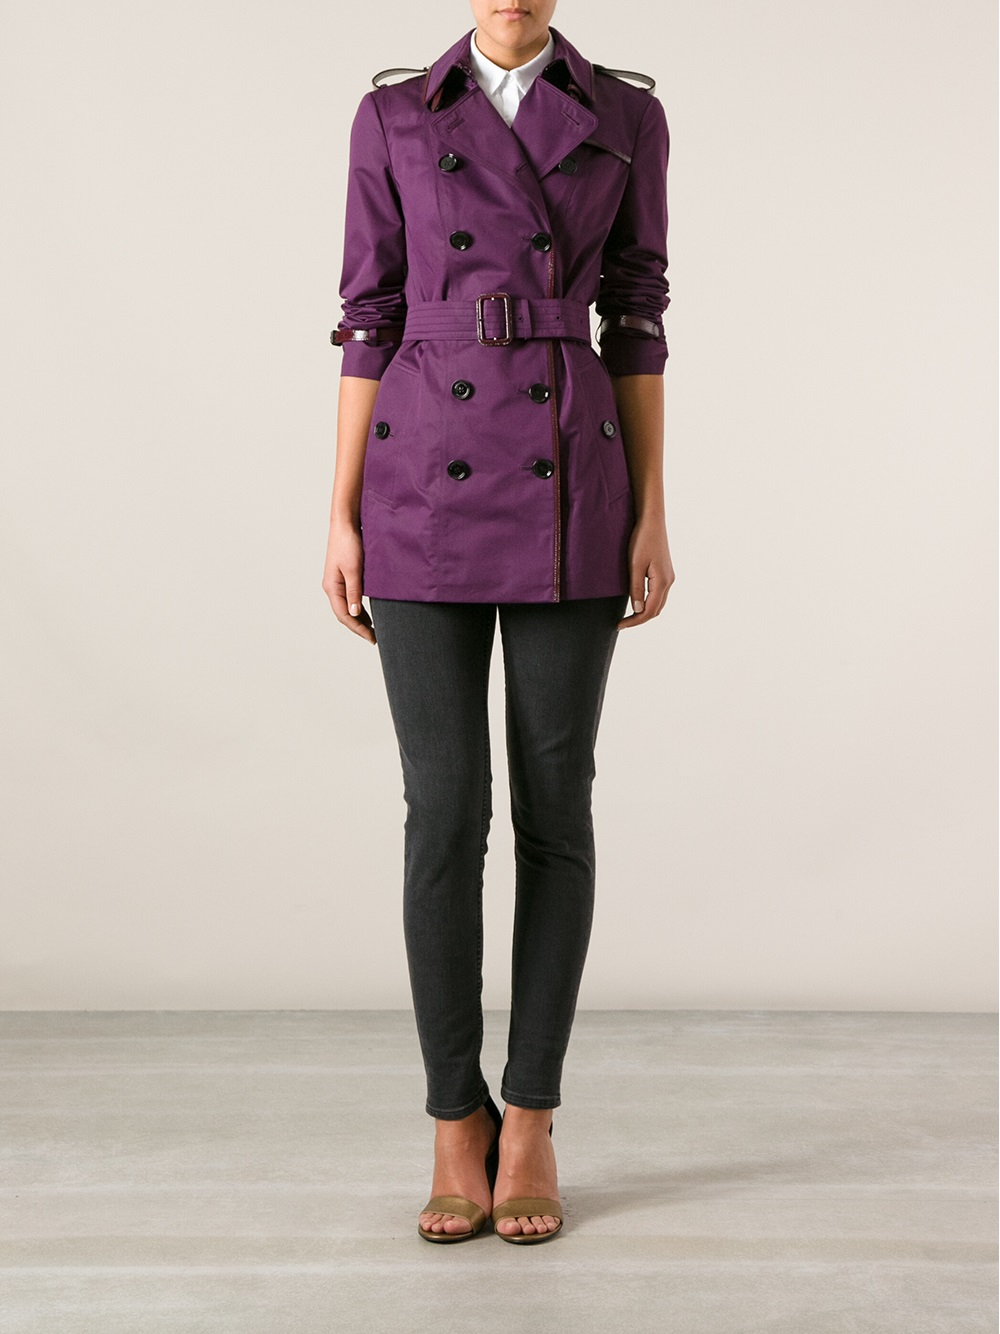 Lyst - Burberry Belted Trench Coat in Purple